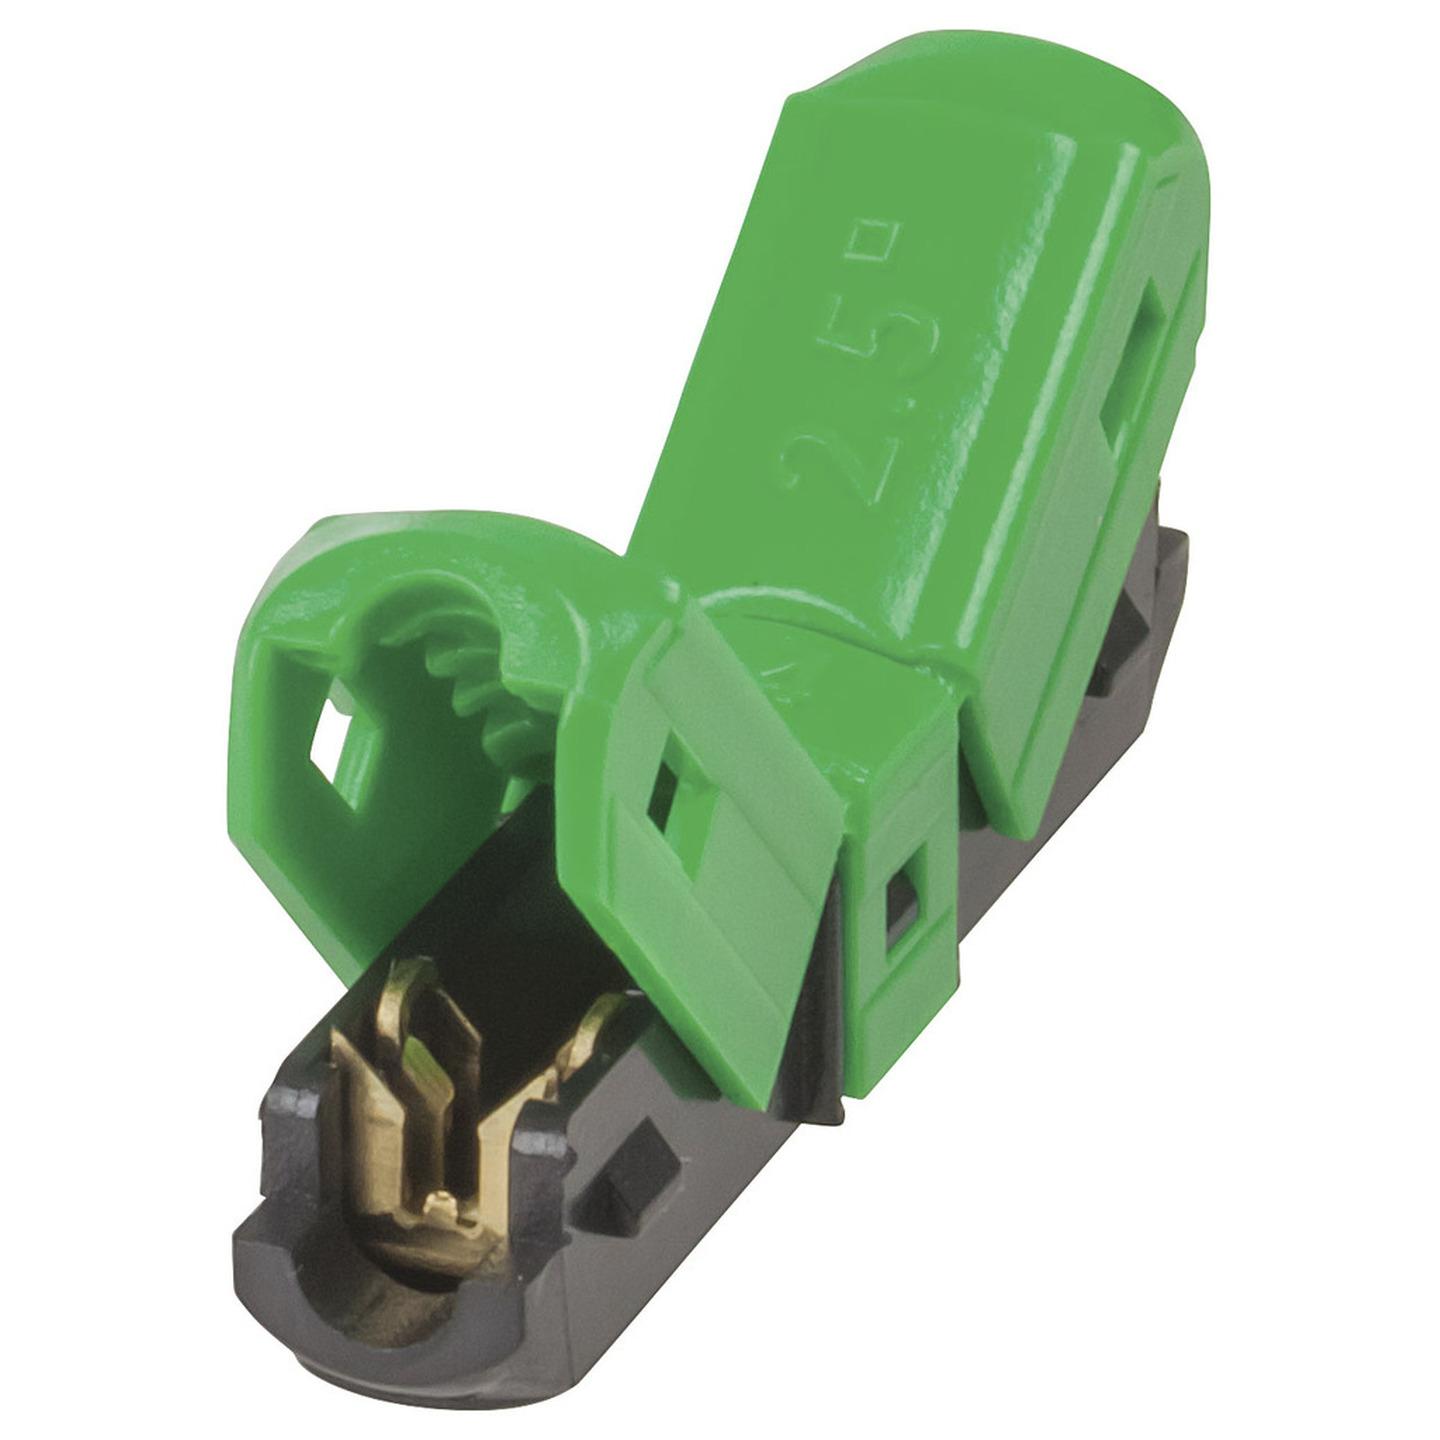 In-Line Jow Connector Clamp 20A - Pack of 2